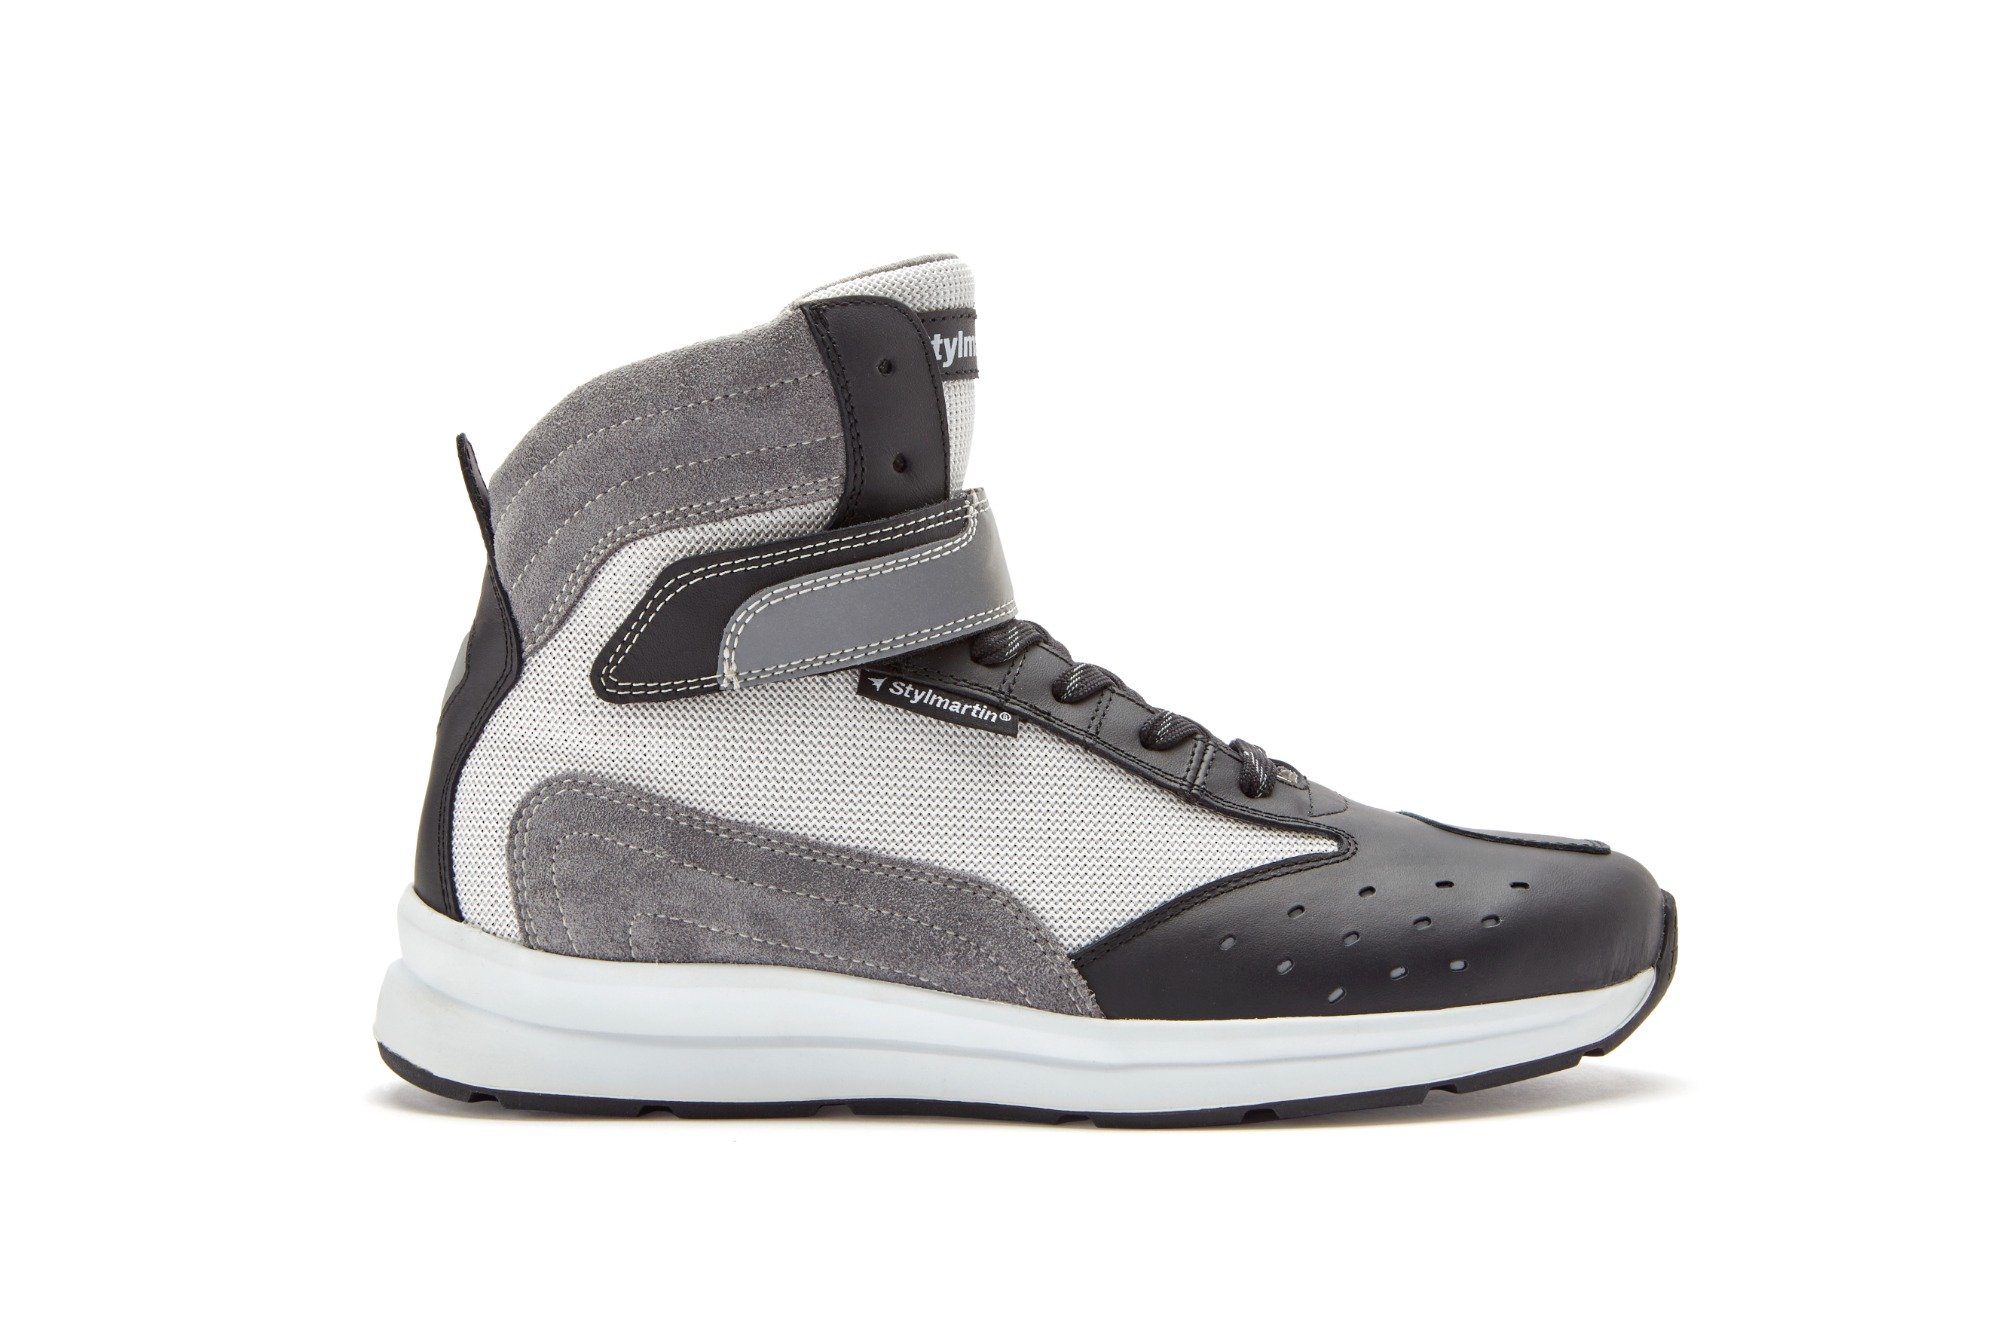 Image of Stylmartin Audax Air Black Anthracite White Size 46 ID 1000001309385